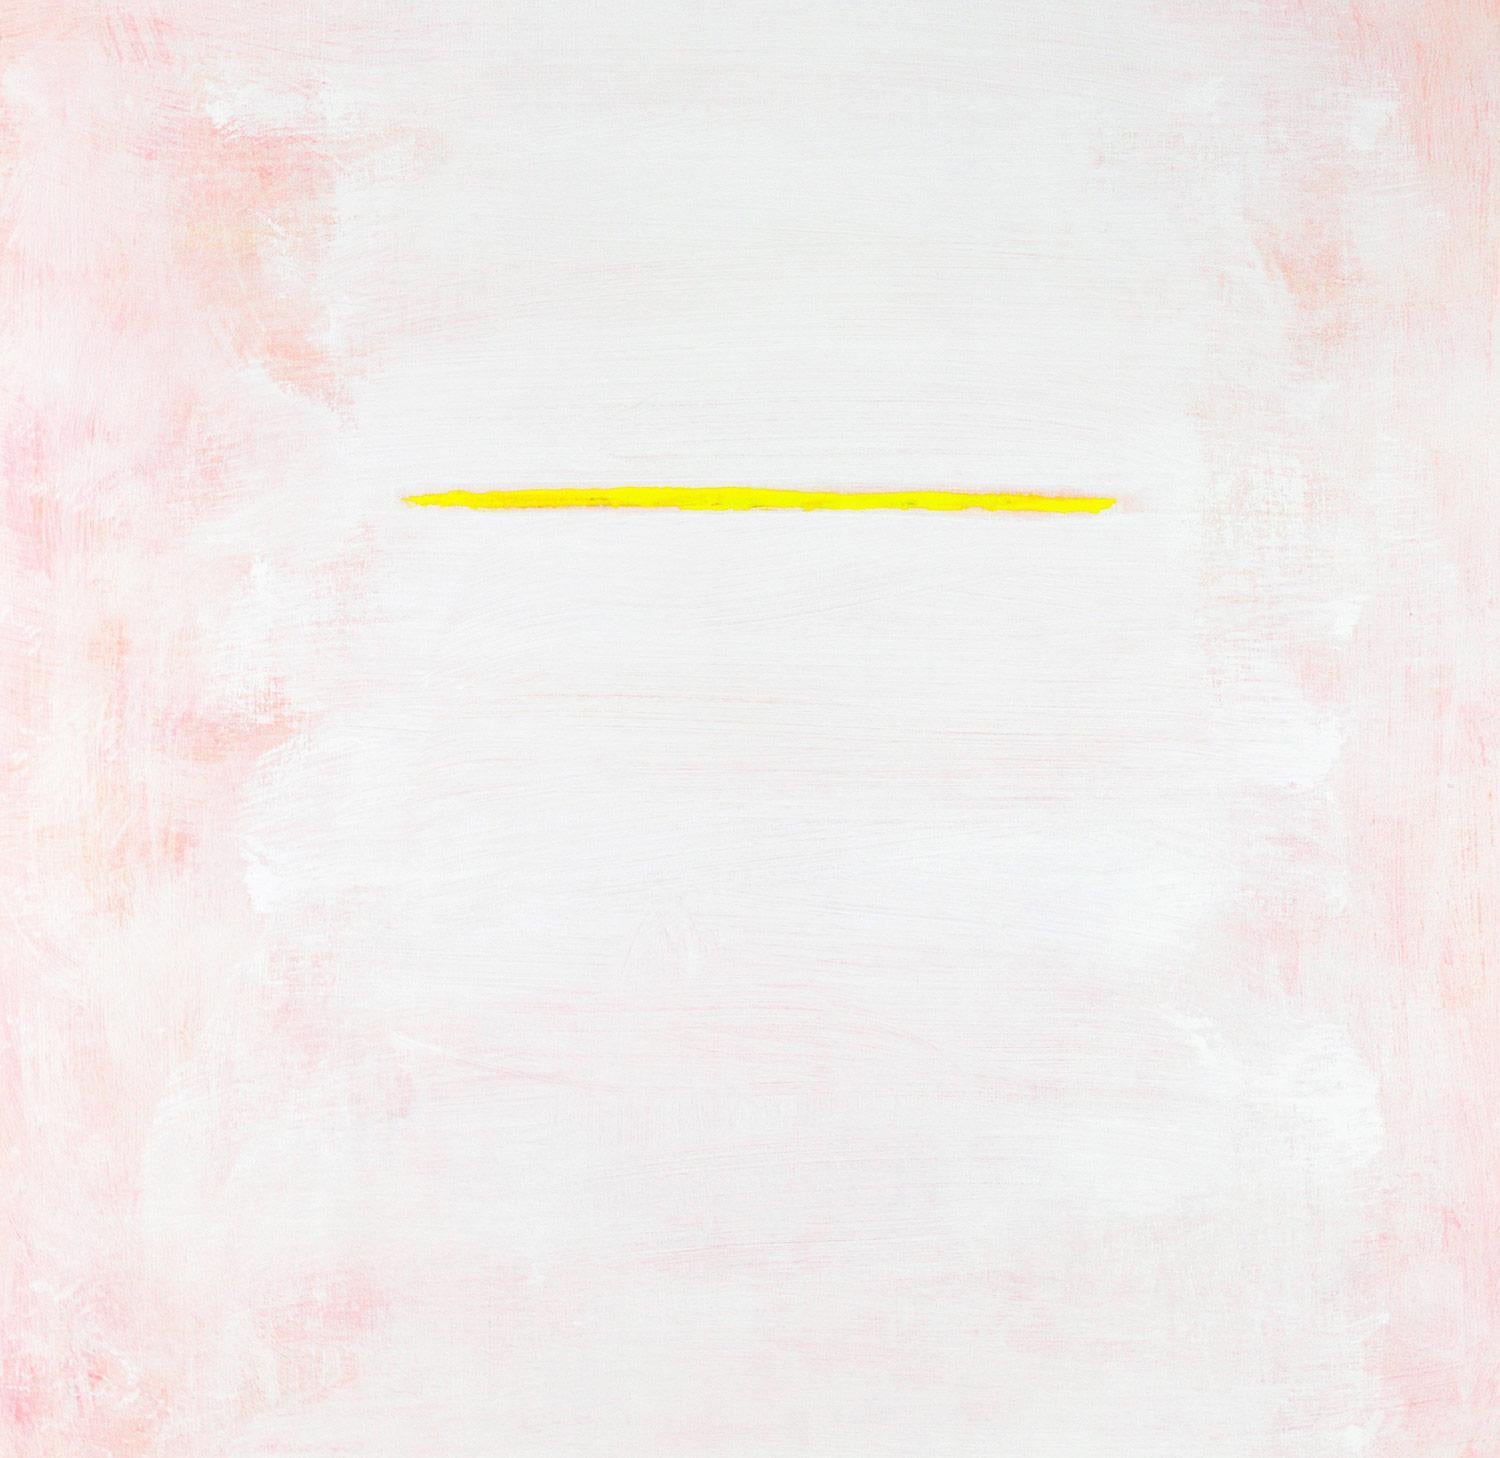 Robert Gregory Phillips Abstract Painting - "On The Horizon In Yellow" Contemporary Acrylic Painting on Canvas